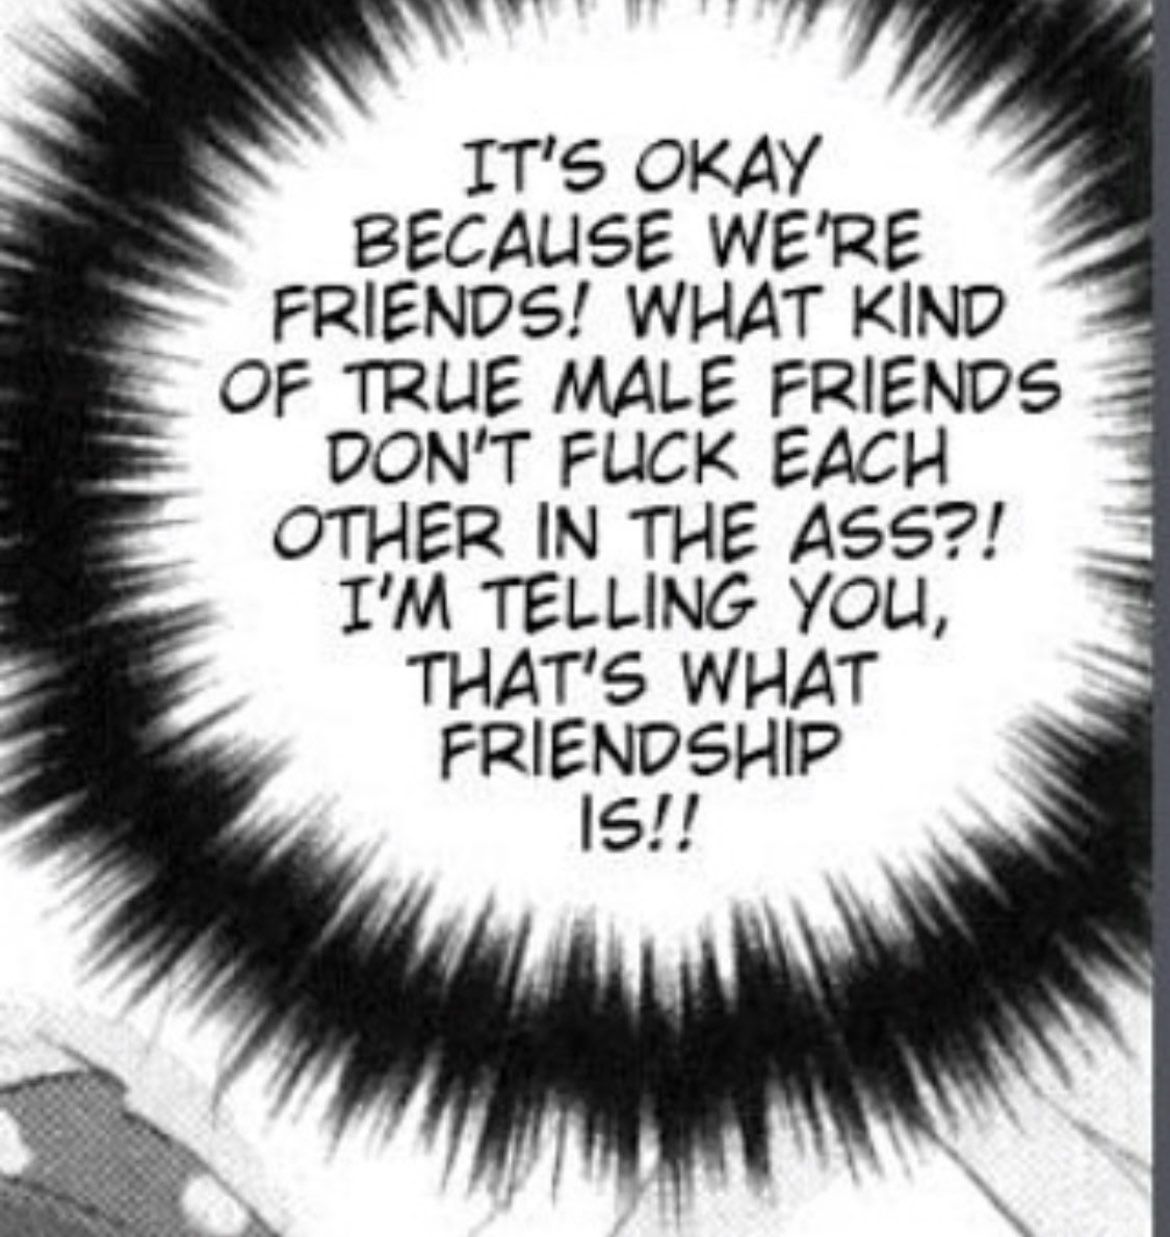 wholesome friendship